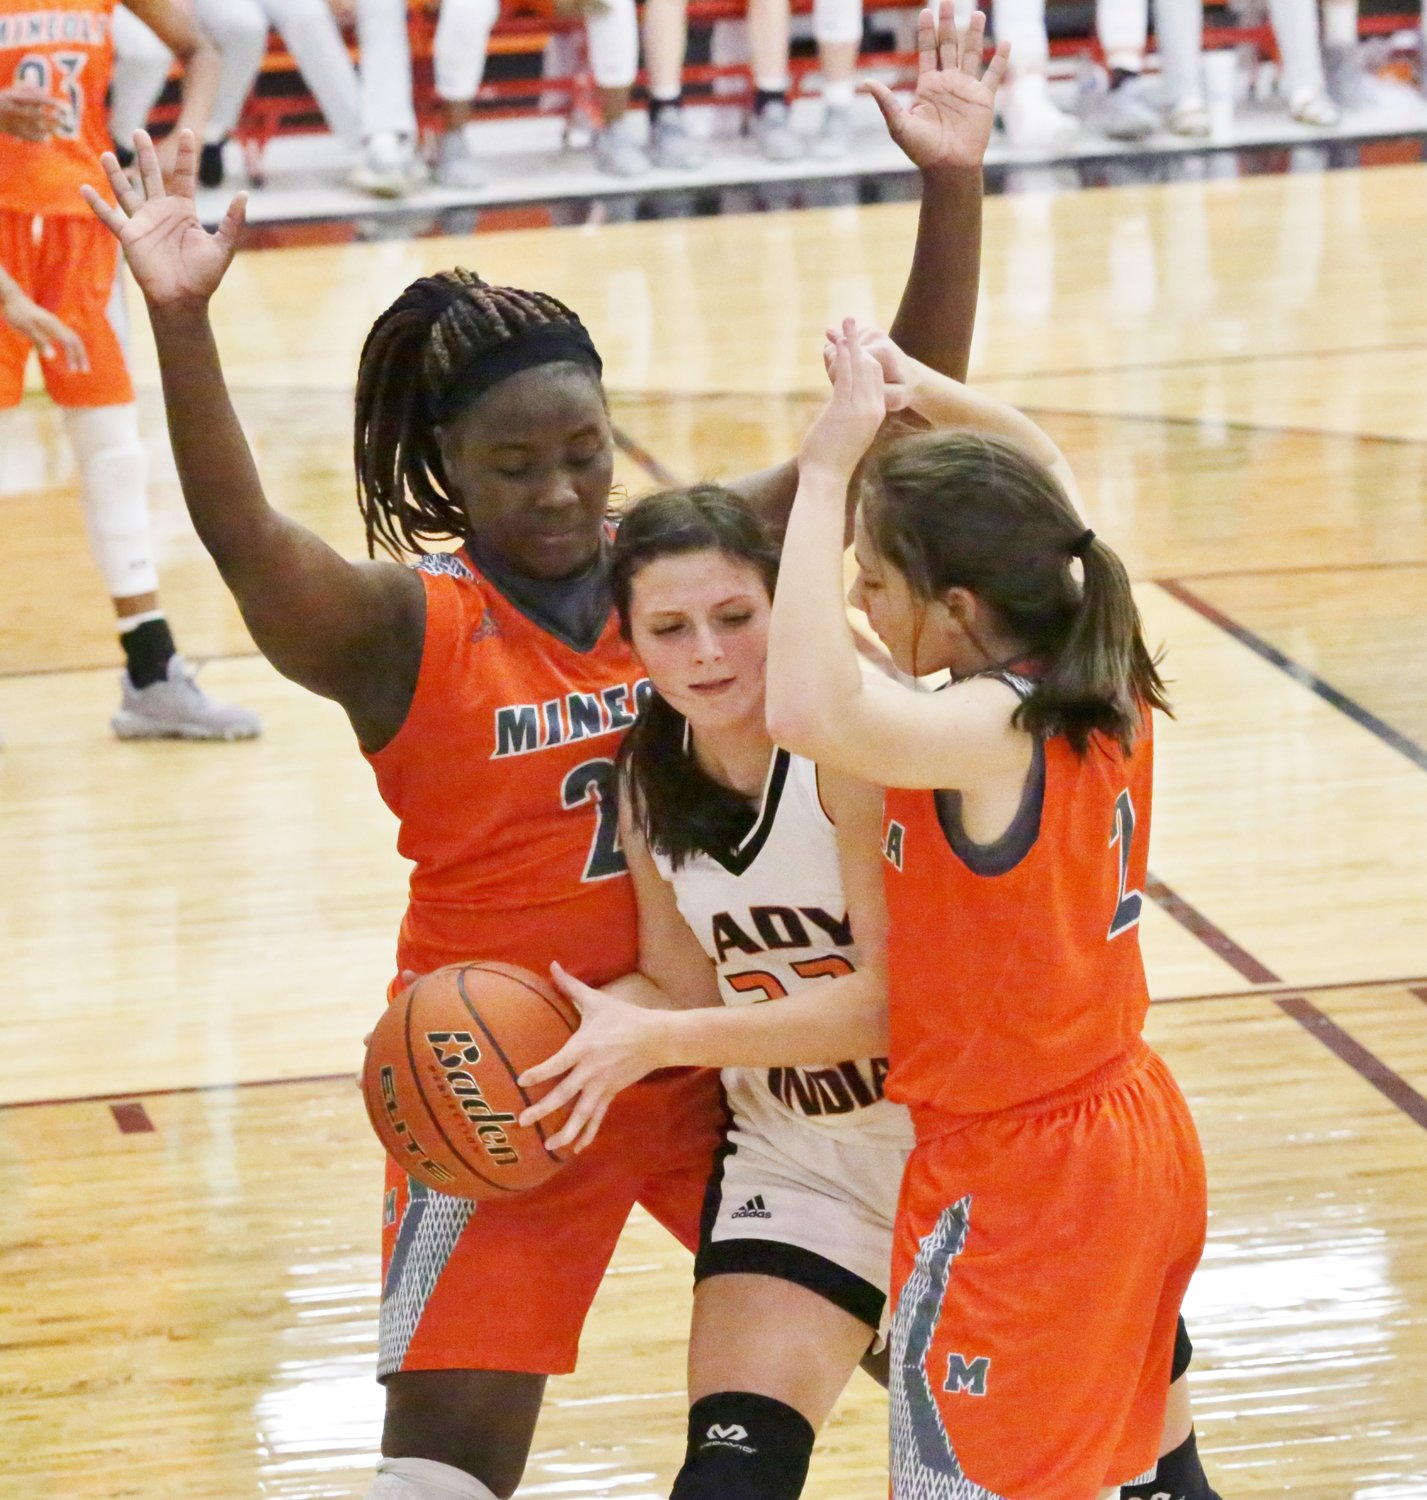 Tiara Stephens (left) and Meghan Brewington trap the ball against Grand Saline. (Monitor photo by John Arbter)